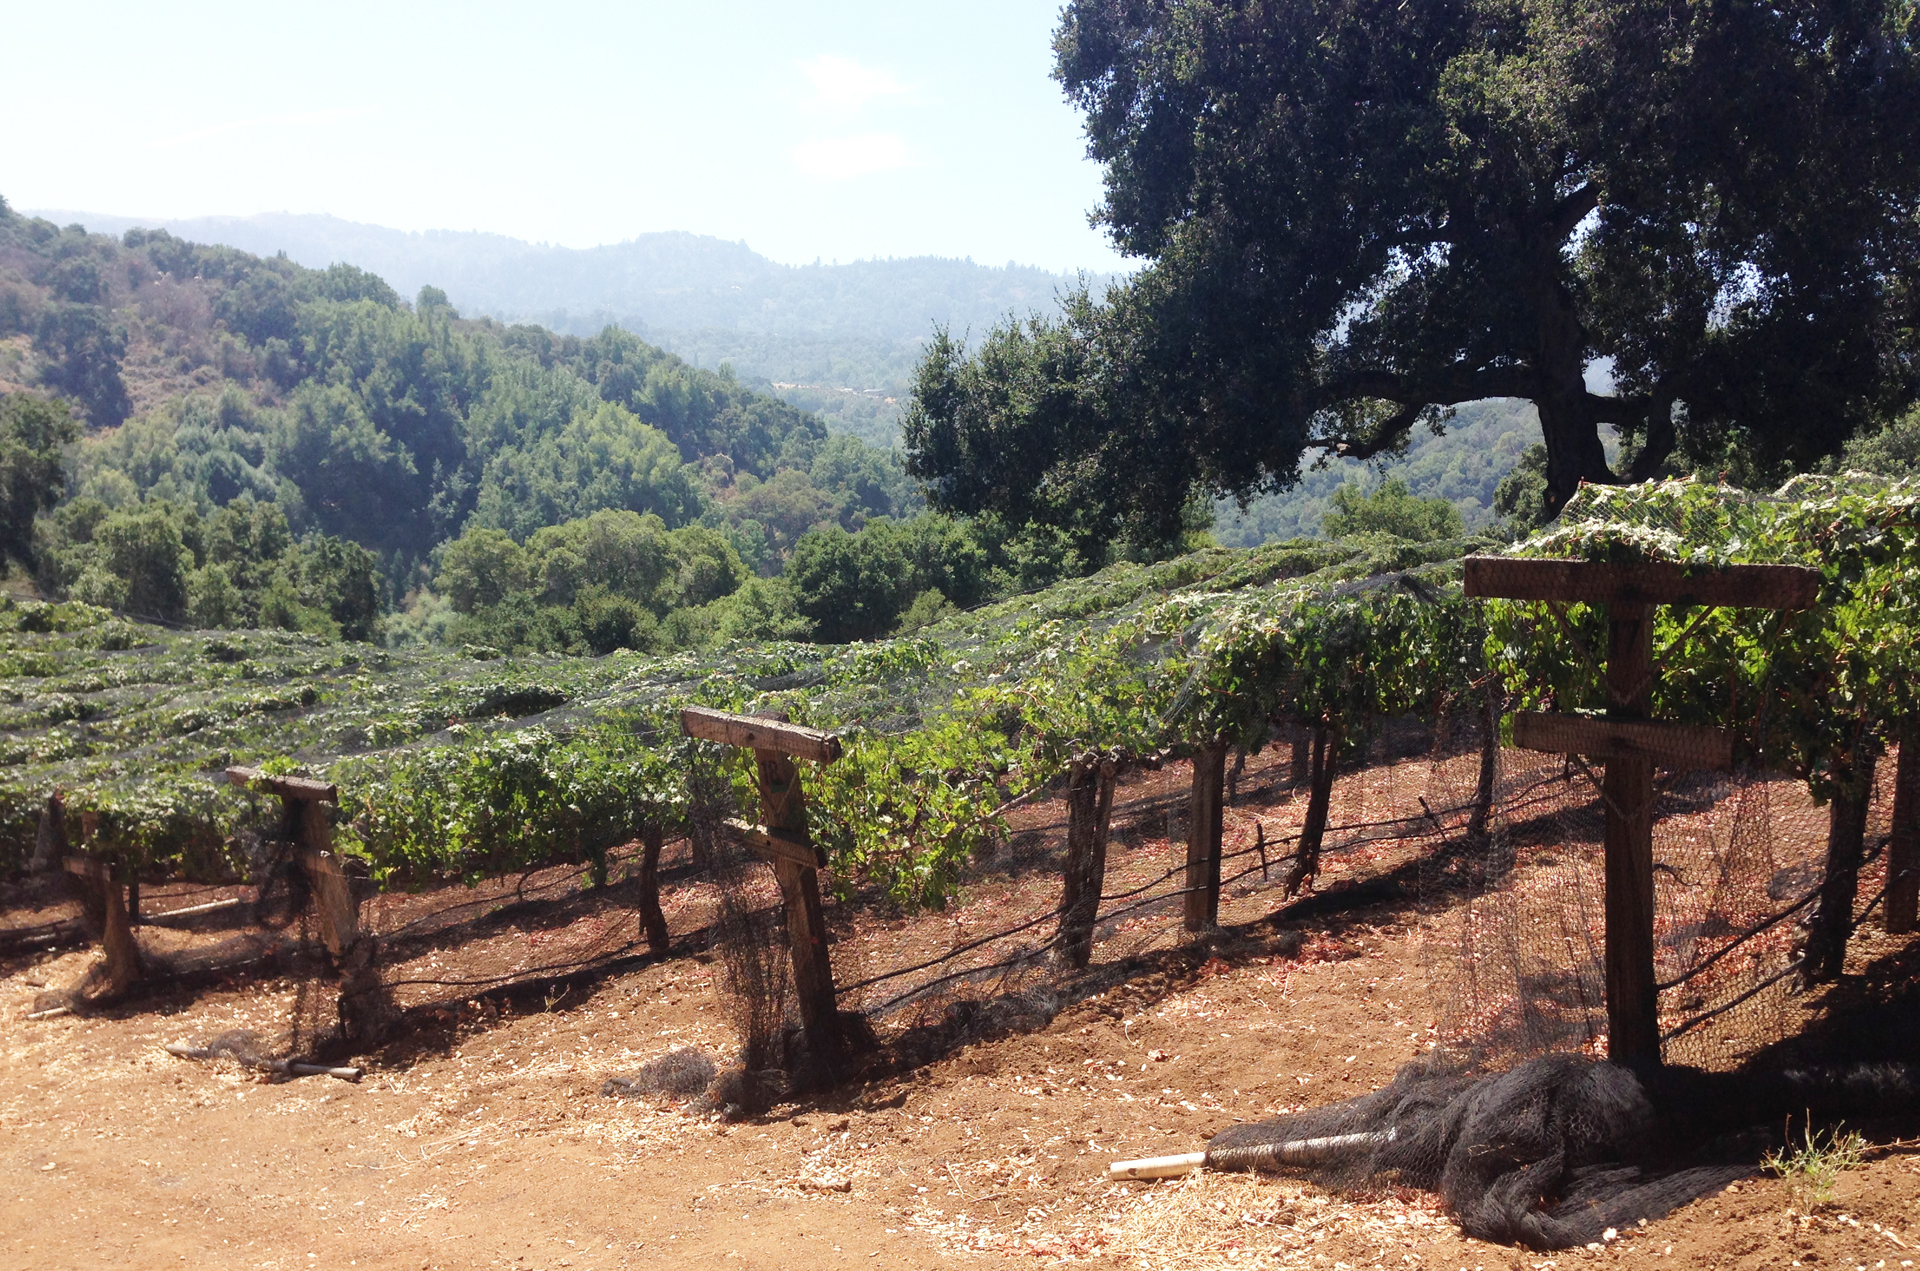 This vineyard in Portola Valley belongs to a well-known billionaire, who like most home vineyard owners, puts up nets to protect grapes from ravaging birds.  Such owners guard their privacy when it comes to their wine activities.